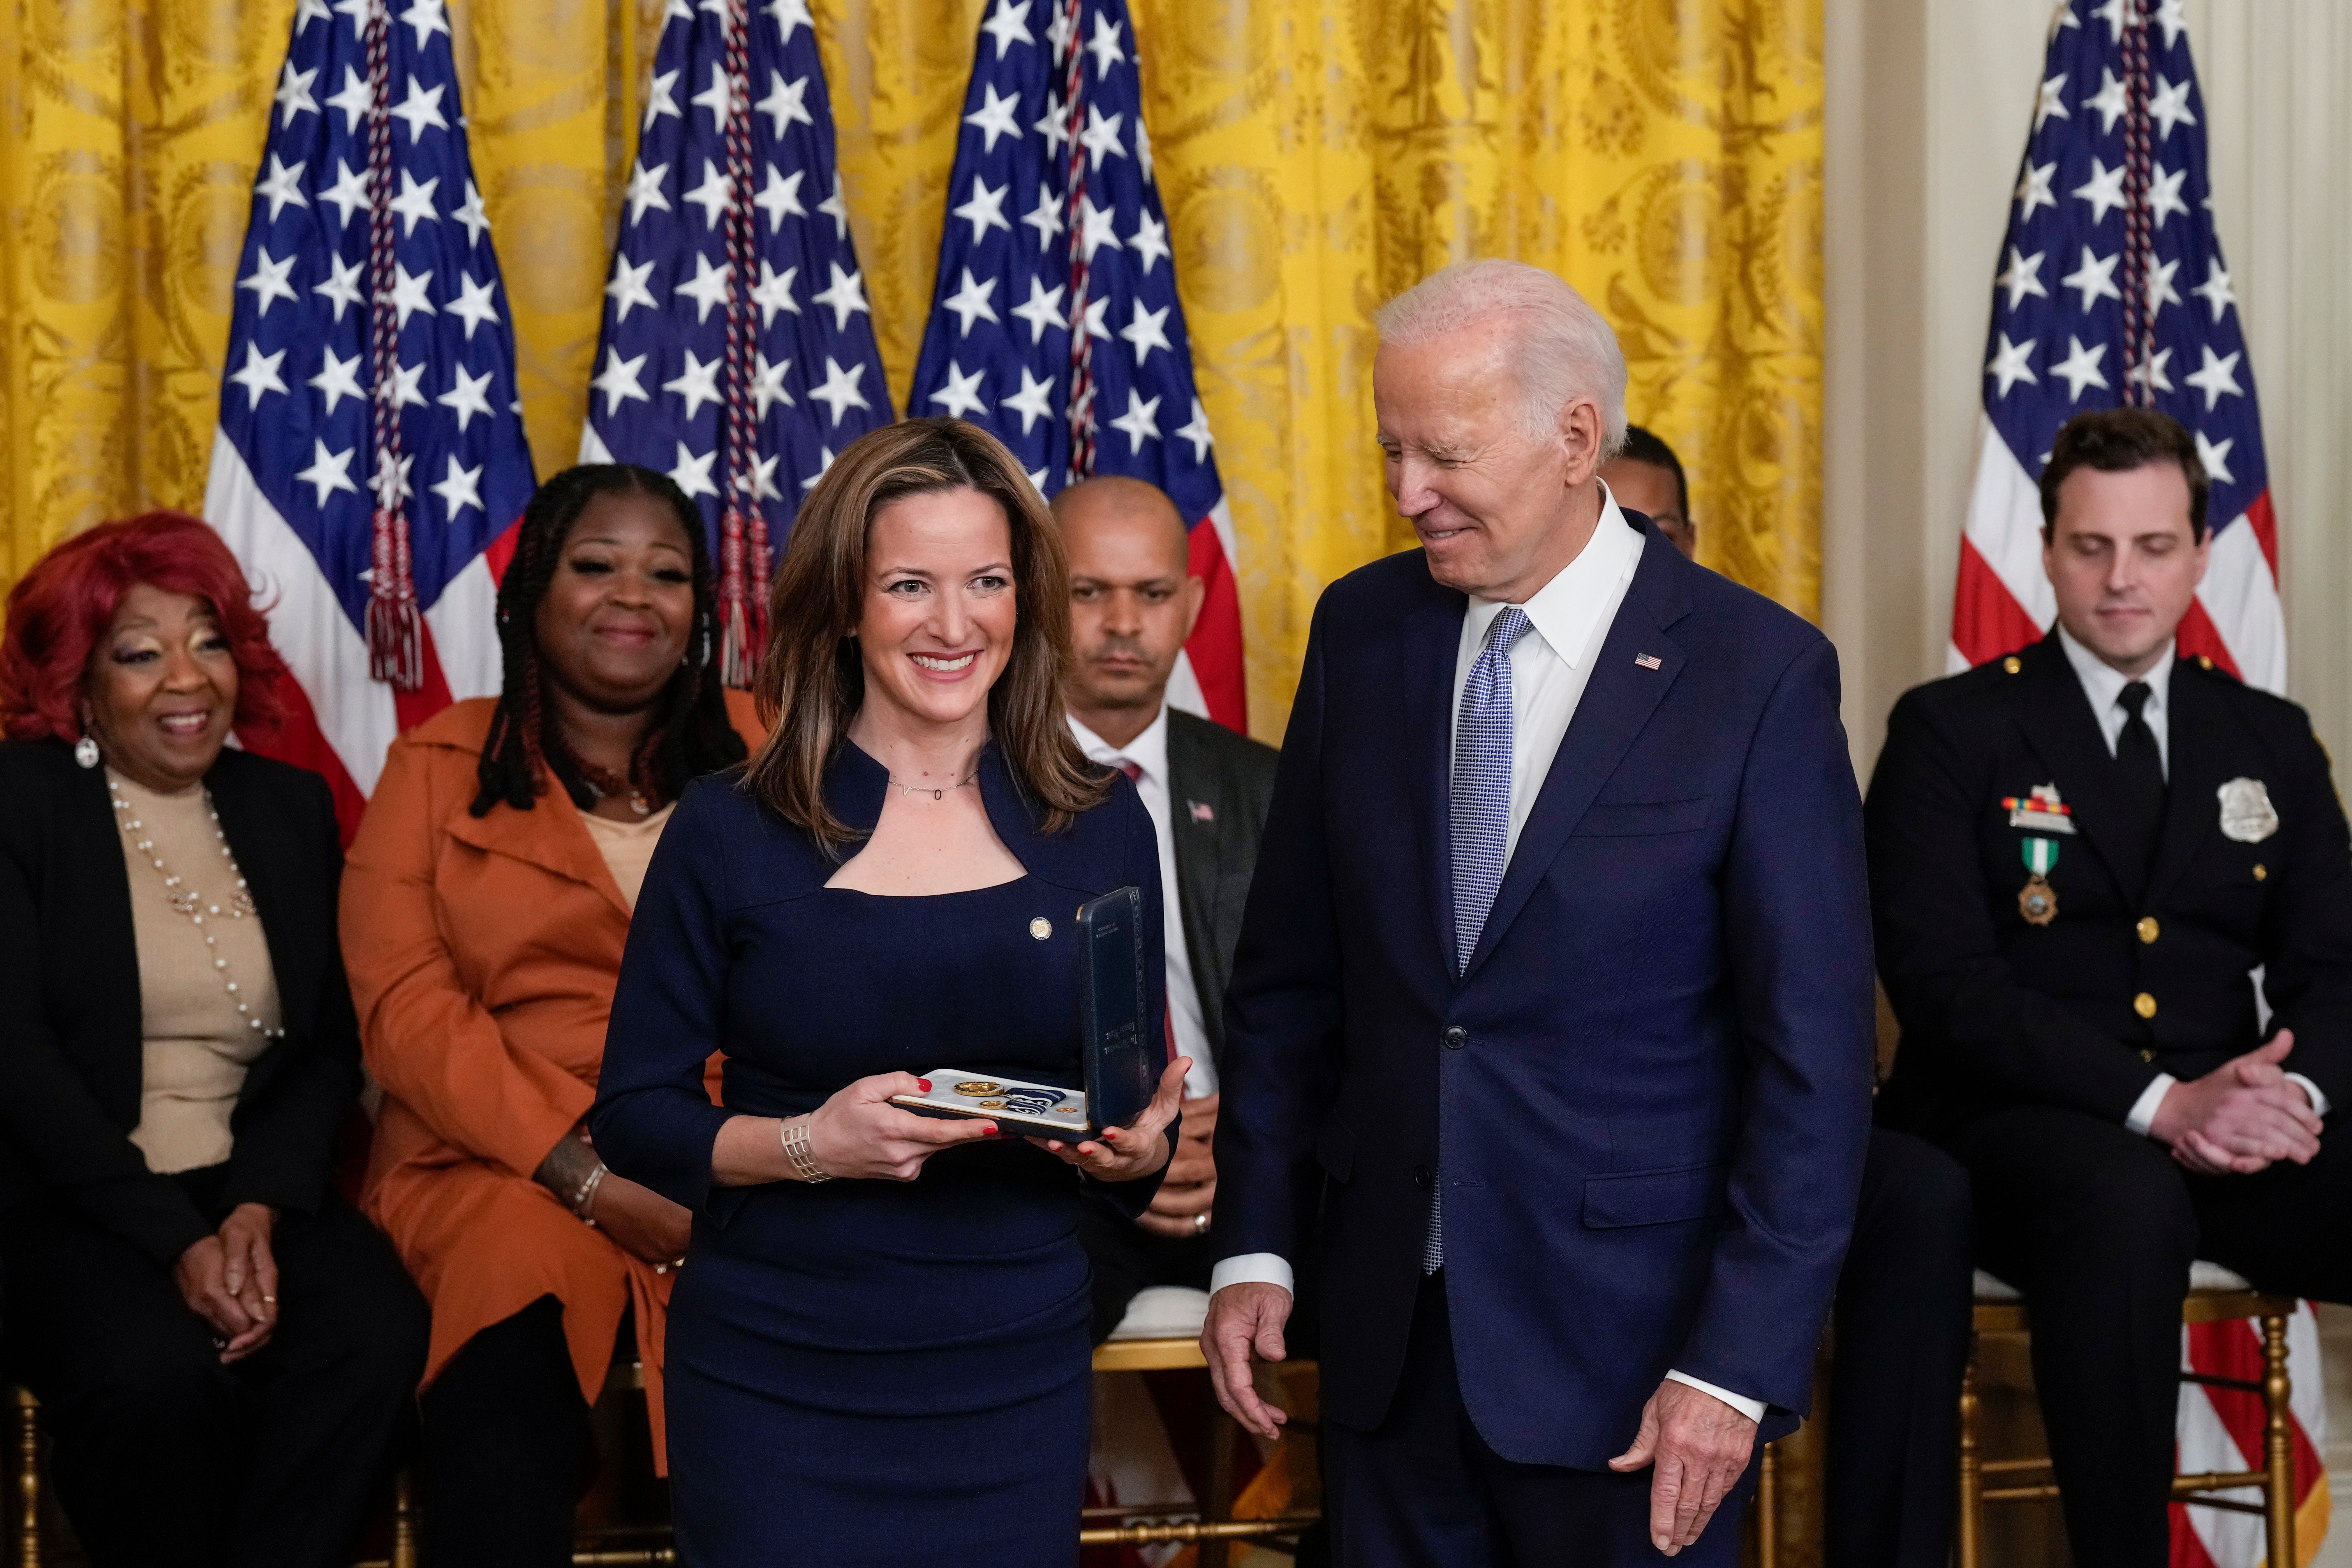 President Joe Biden presents Michigan Secretary of State Jocelyn Benson a Presidential Citizens Medal during a ceremony to mark the two-year anniversary of the January 6 attack on the Capitol